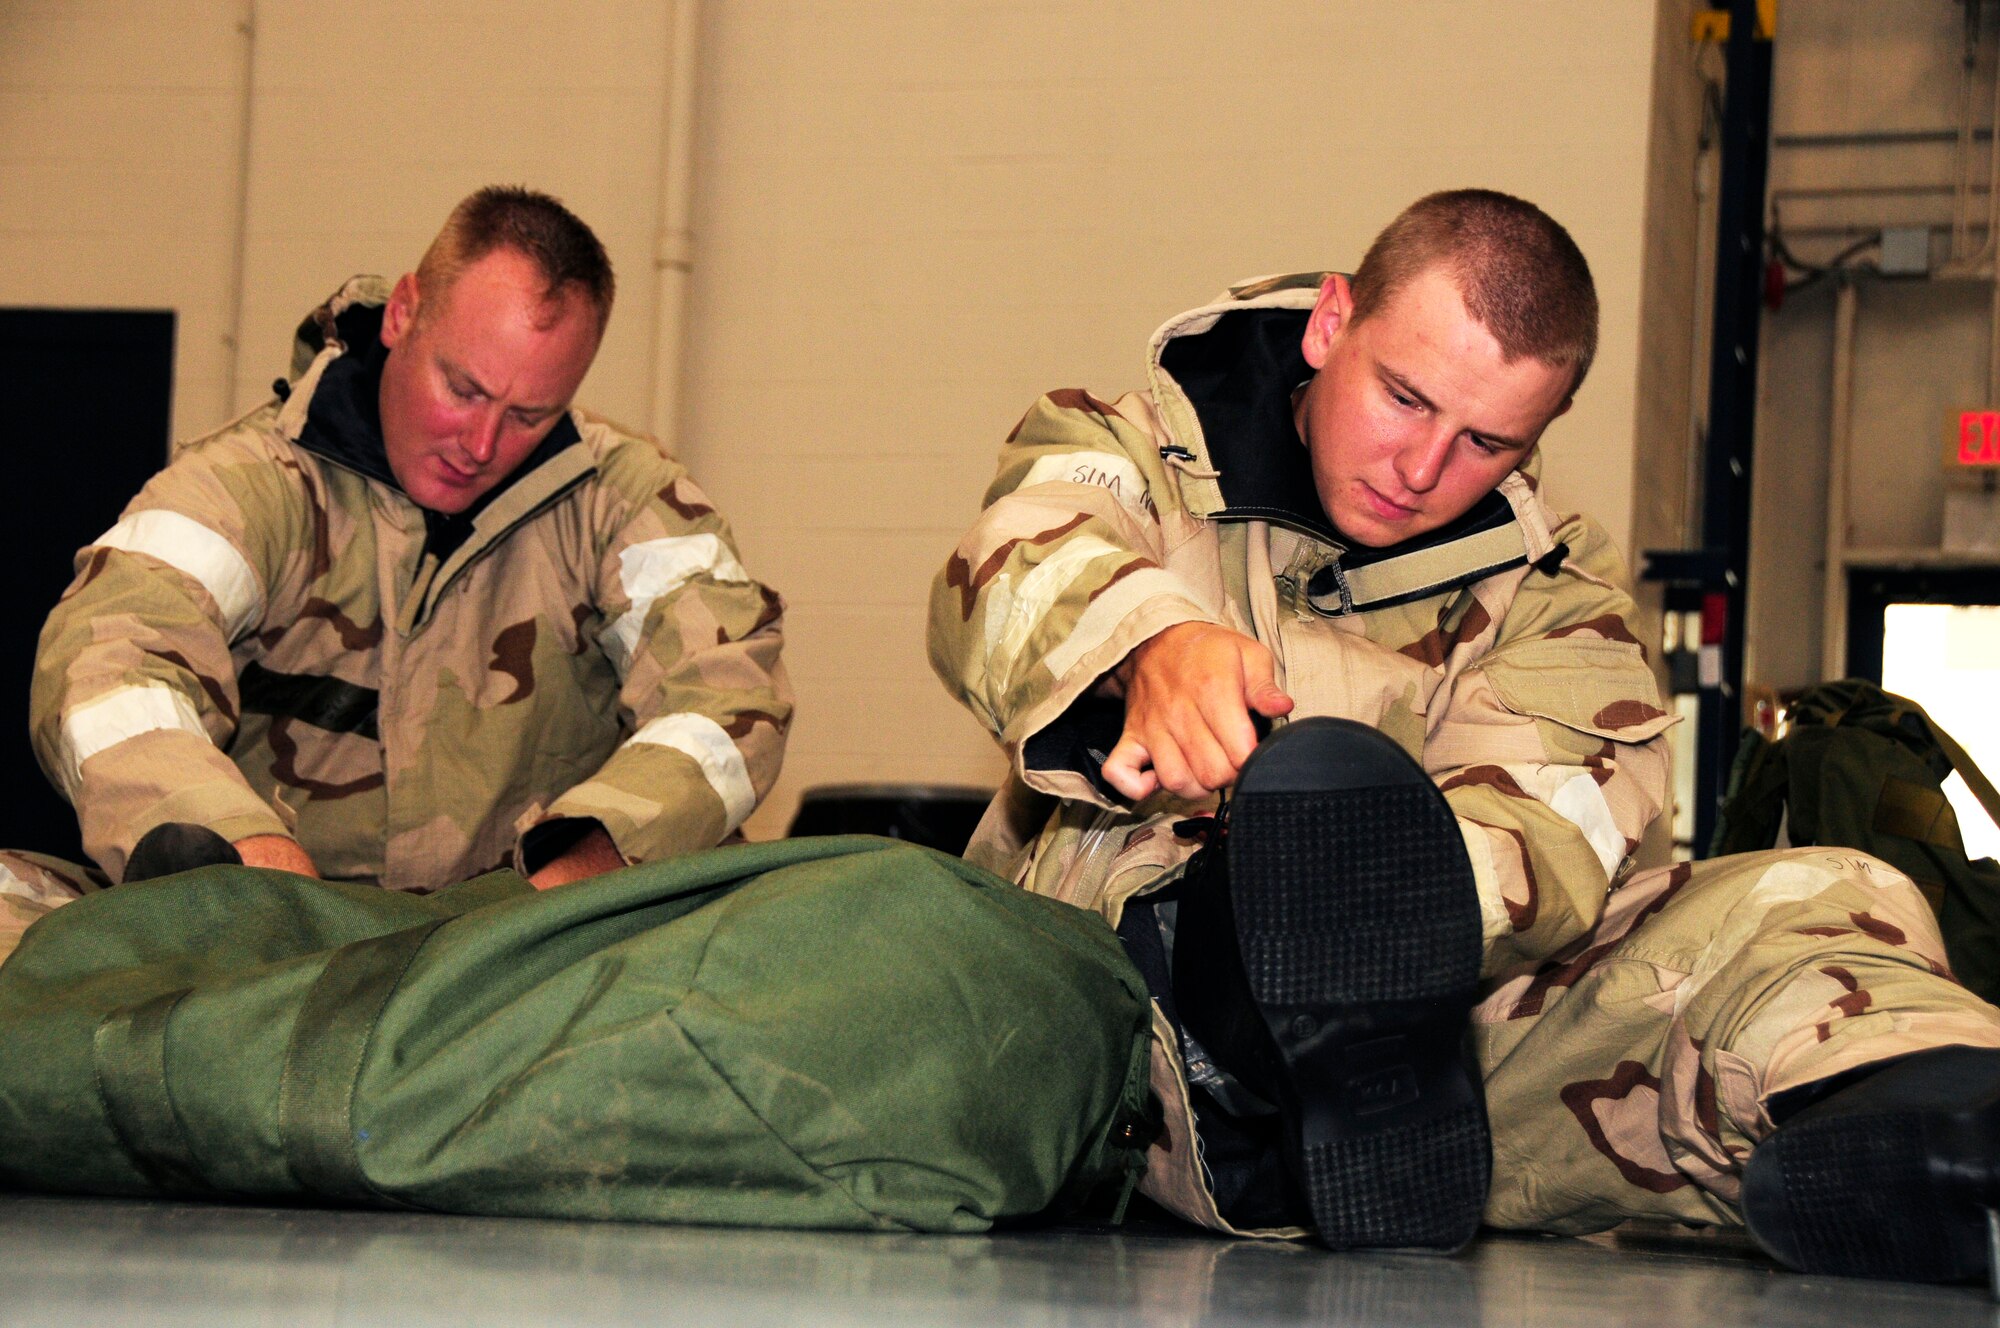 U.S. Air Force Master Sgt. Jedediah Williams and Airman First Class, James Saulnier, members of the 145th Logistics Readiness Squadron, Small Air Terminal, don mission-oriented protective posture gear during Air Expeditionary Skills Rodeo training held at the North Carolina Air National Guard Base, Charlotte Douglas International Airport, Sept. 13, 2015. This training is used by Airmen who are deploying or preparing for inspections. These skills make up the foundation necessary for all Airmen to function effectively in non-conventional hostile environments. (U.S. Air National Guard photo by Master Sgt. Patricia F. Moran, 145th Public Affairs/Released)